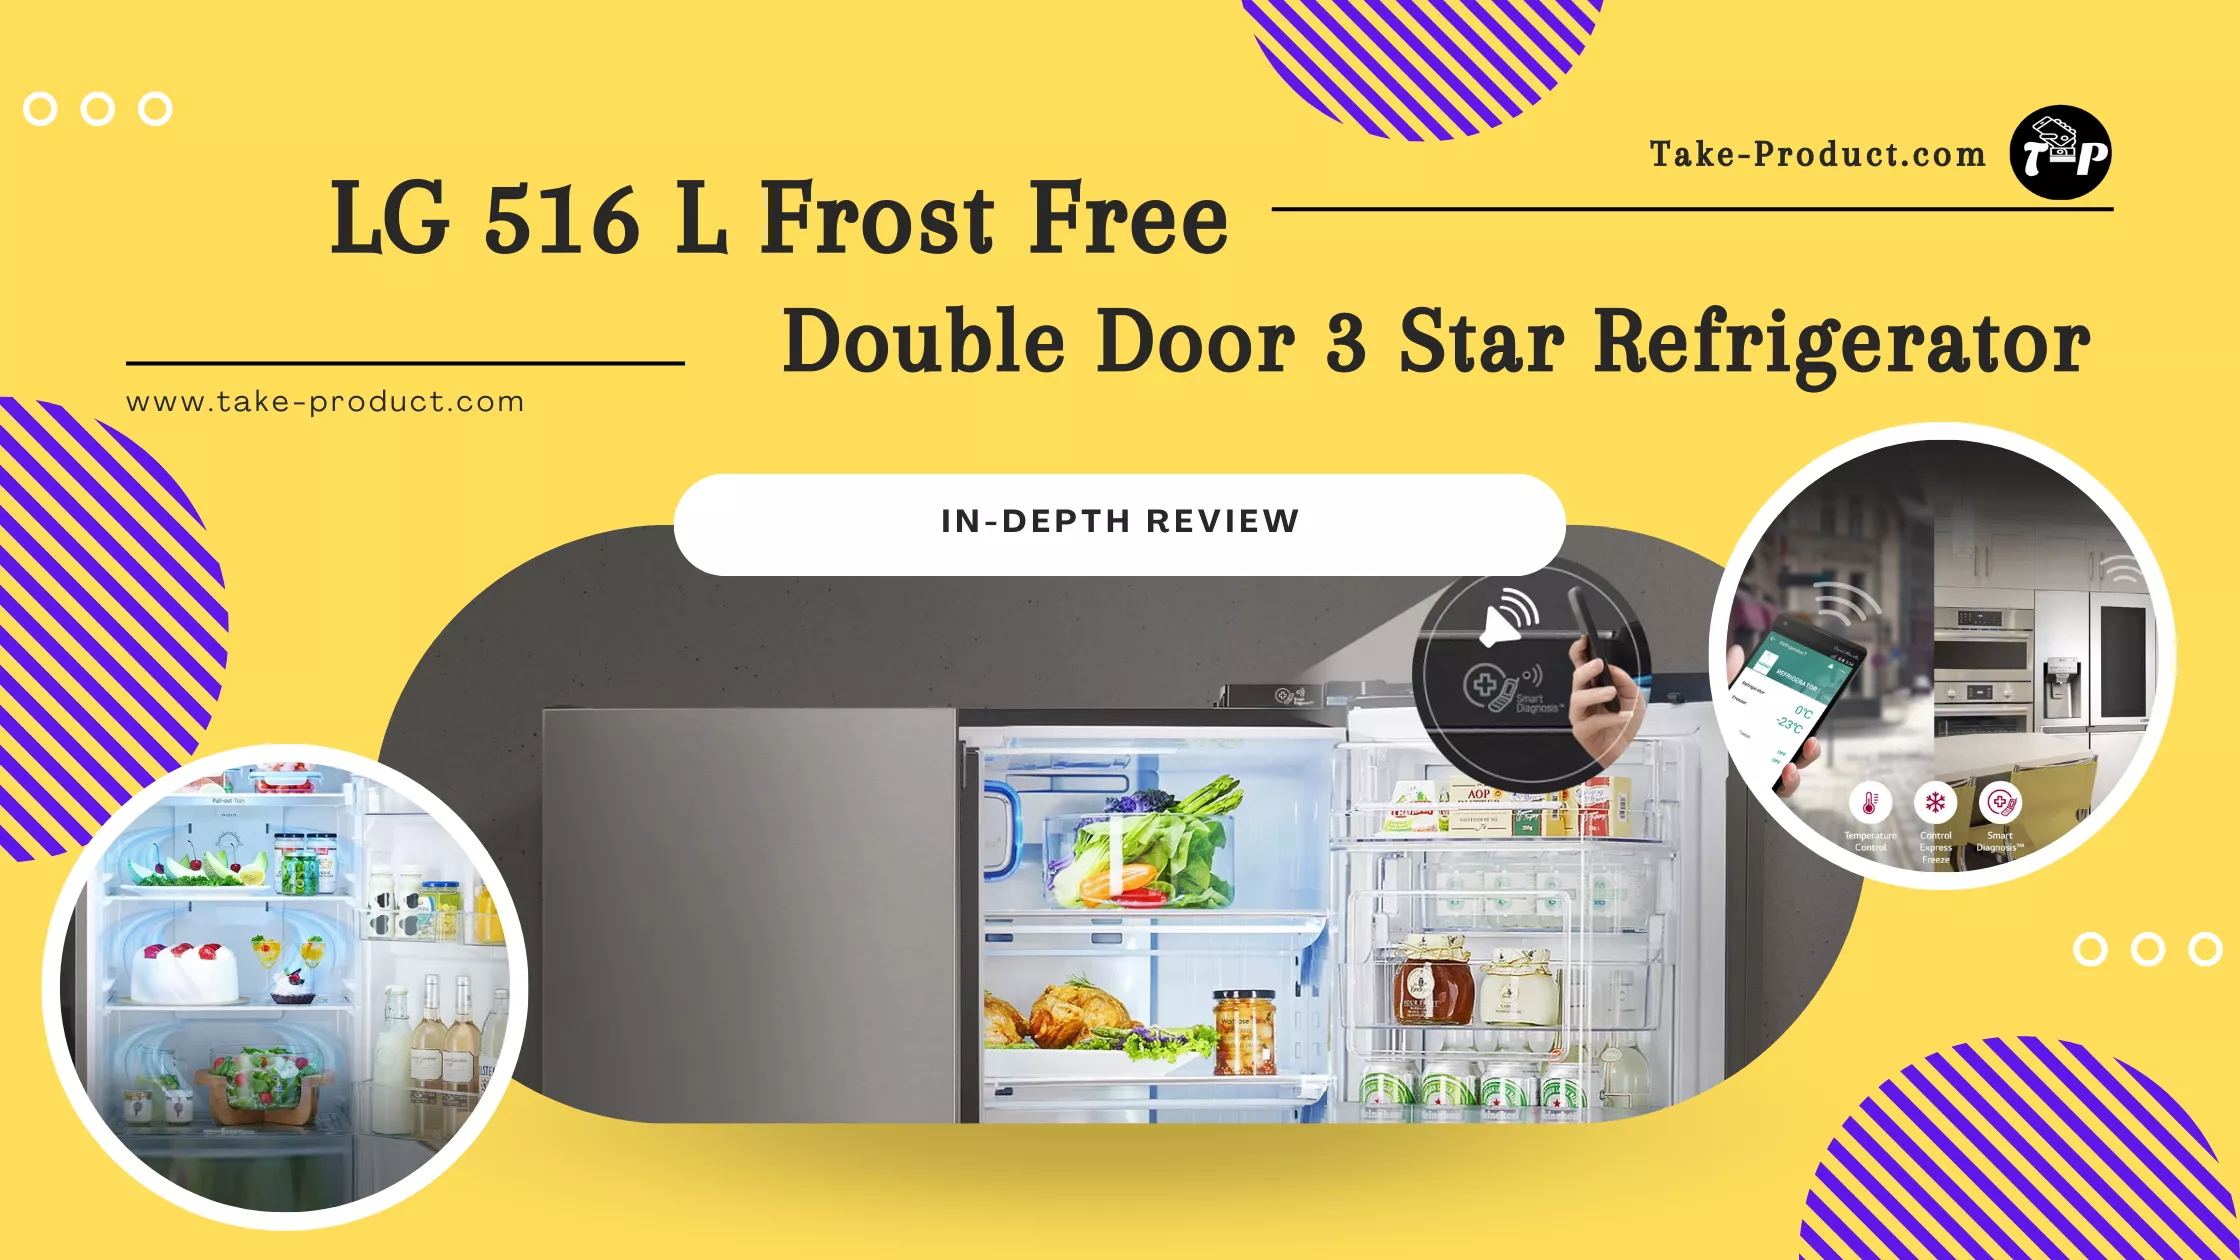 Your Gateway to Fresh and Effective Food Storage with the Best LG Refrigerator 516 L Frost Free Double Door 3-Star